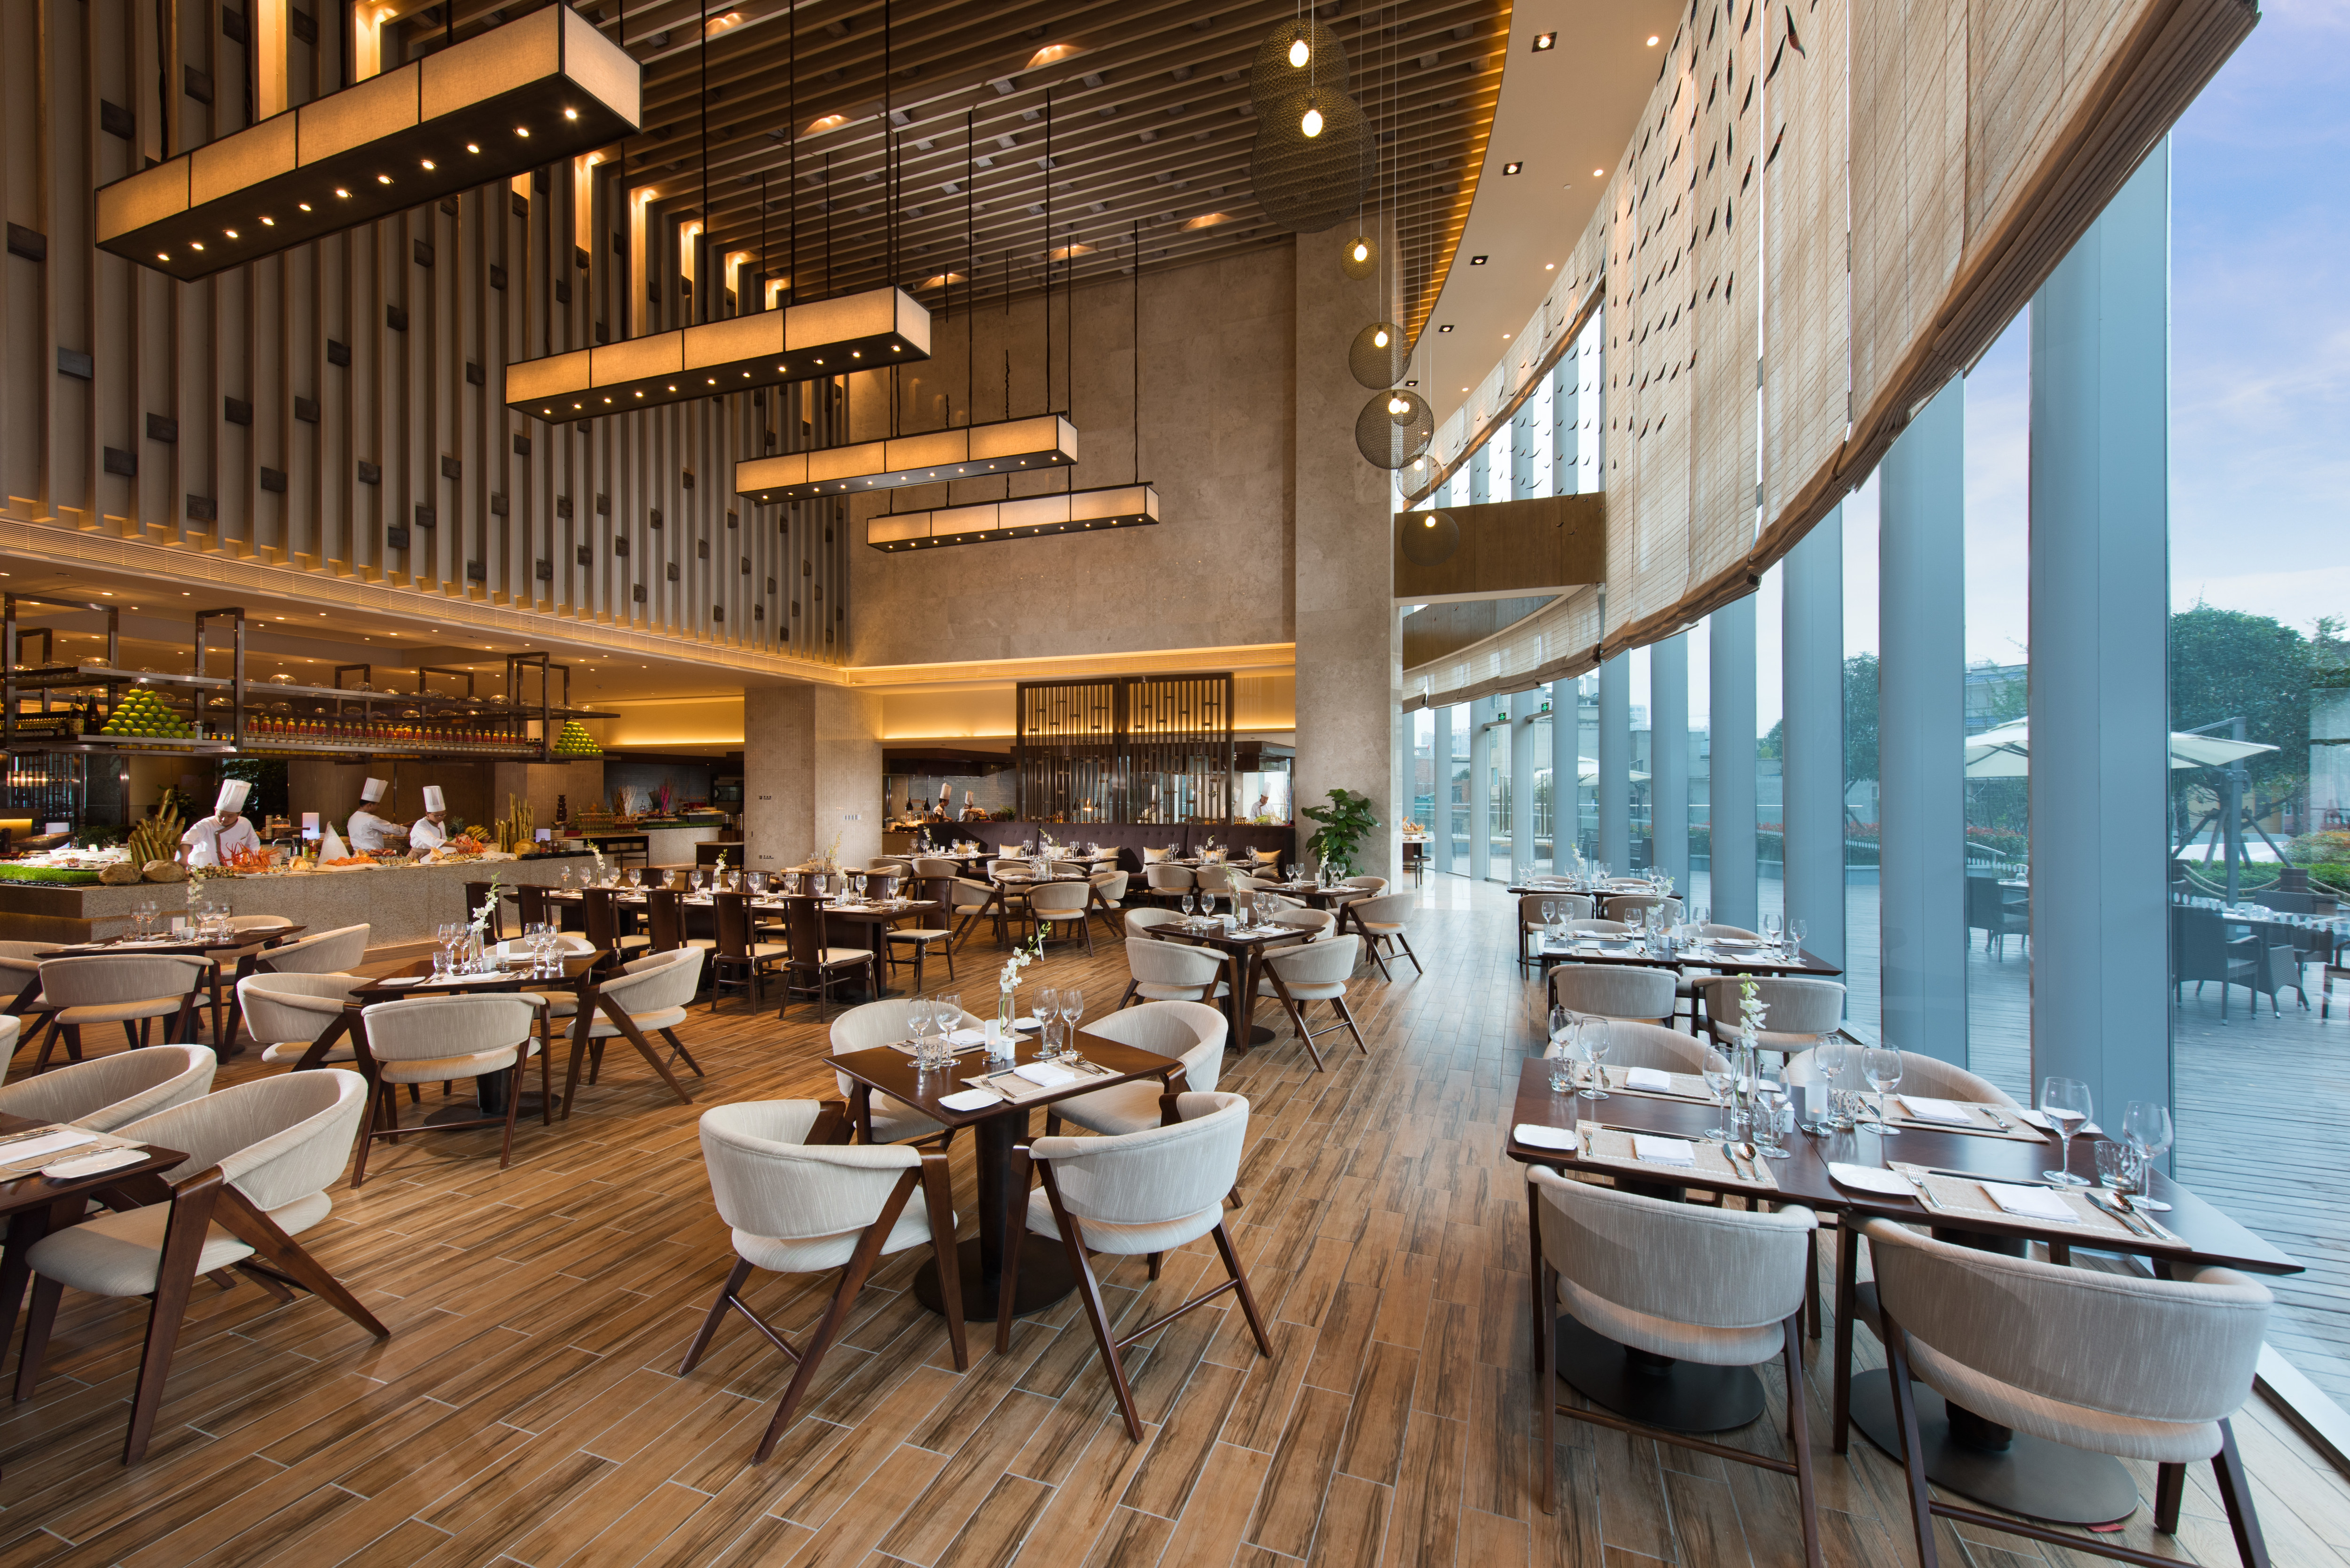 Decorative Lighting, Large Windows With View, Three Chefs in Food Service Area, and Dining Seating Options